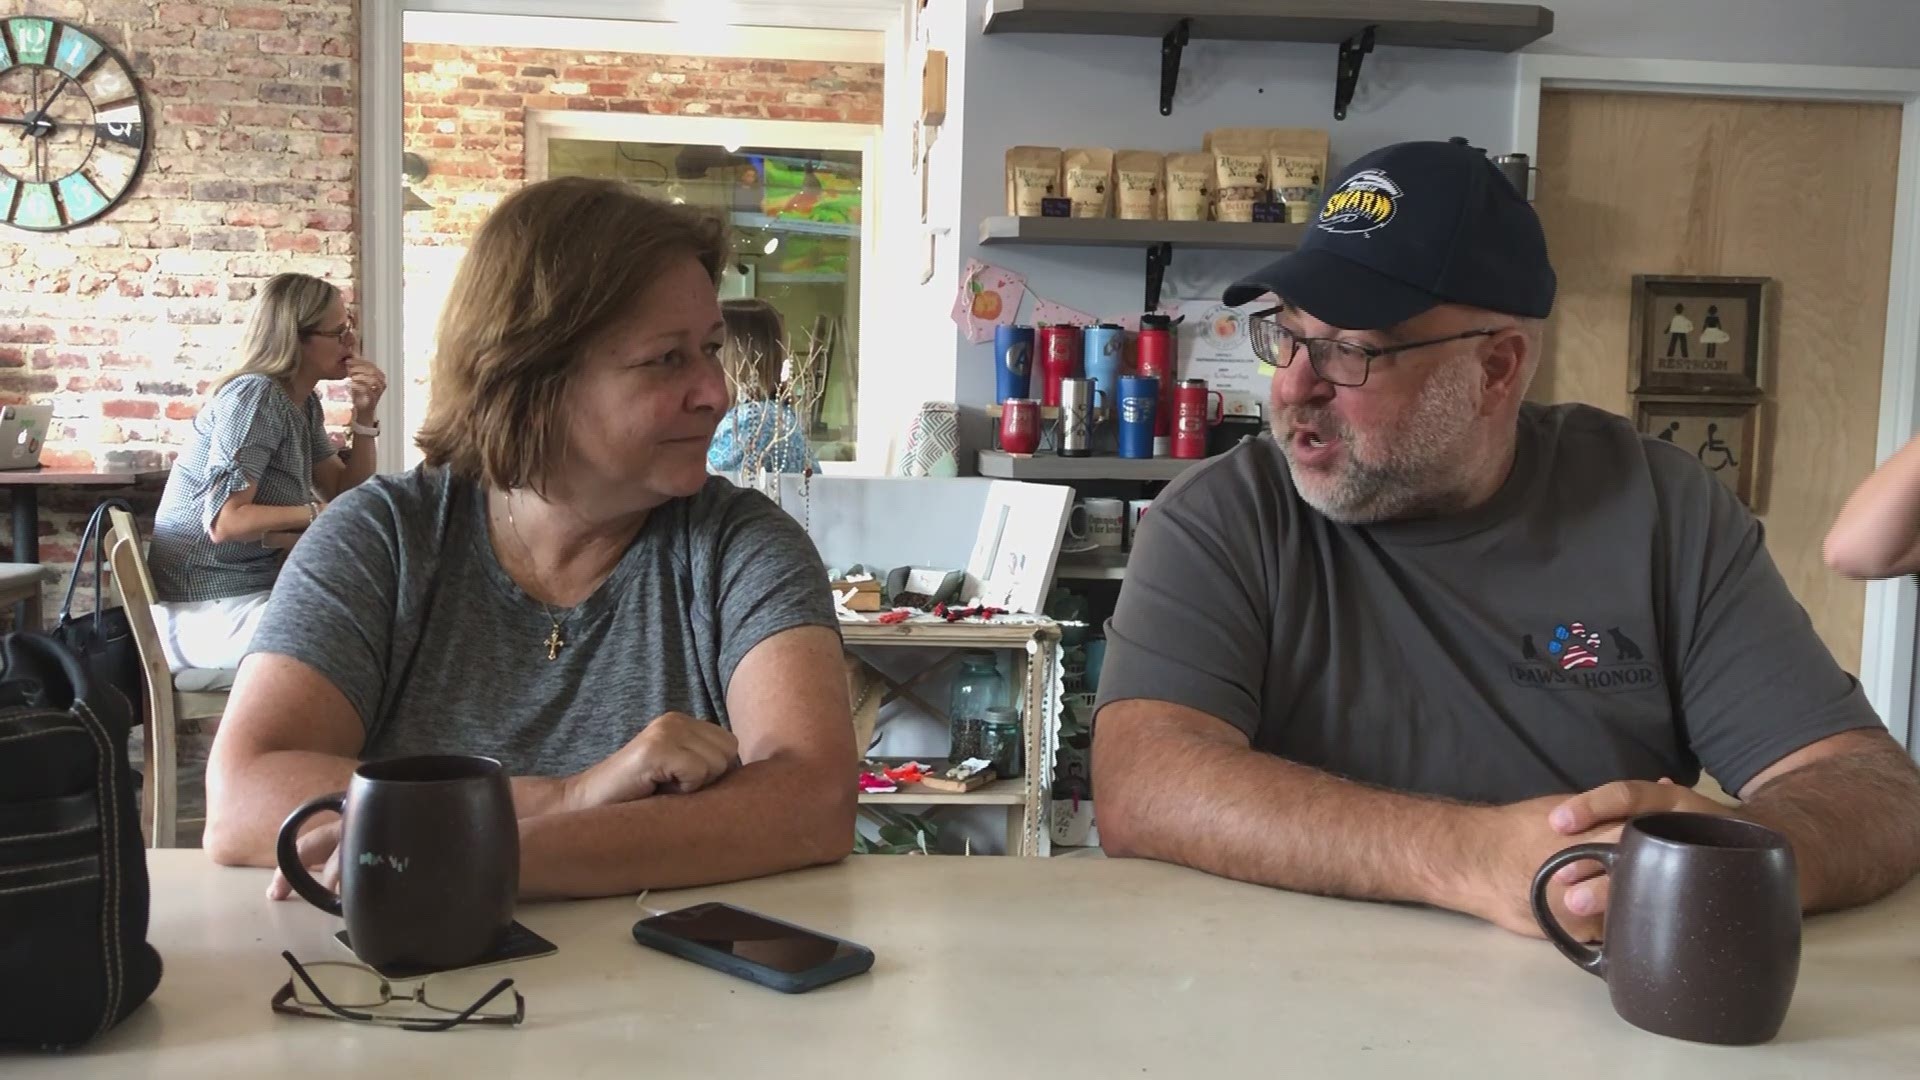 Kayla Bergeron and Kenneth Marchello survived the attacks on the World Trade Center 18 years ago. This week they met for the first time at a coffee shop in Cumming, Ga.